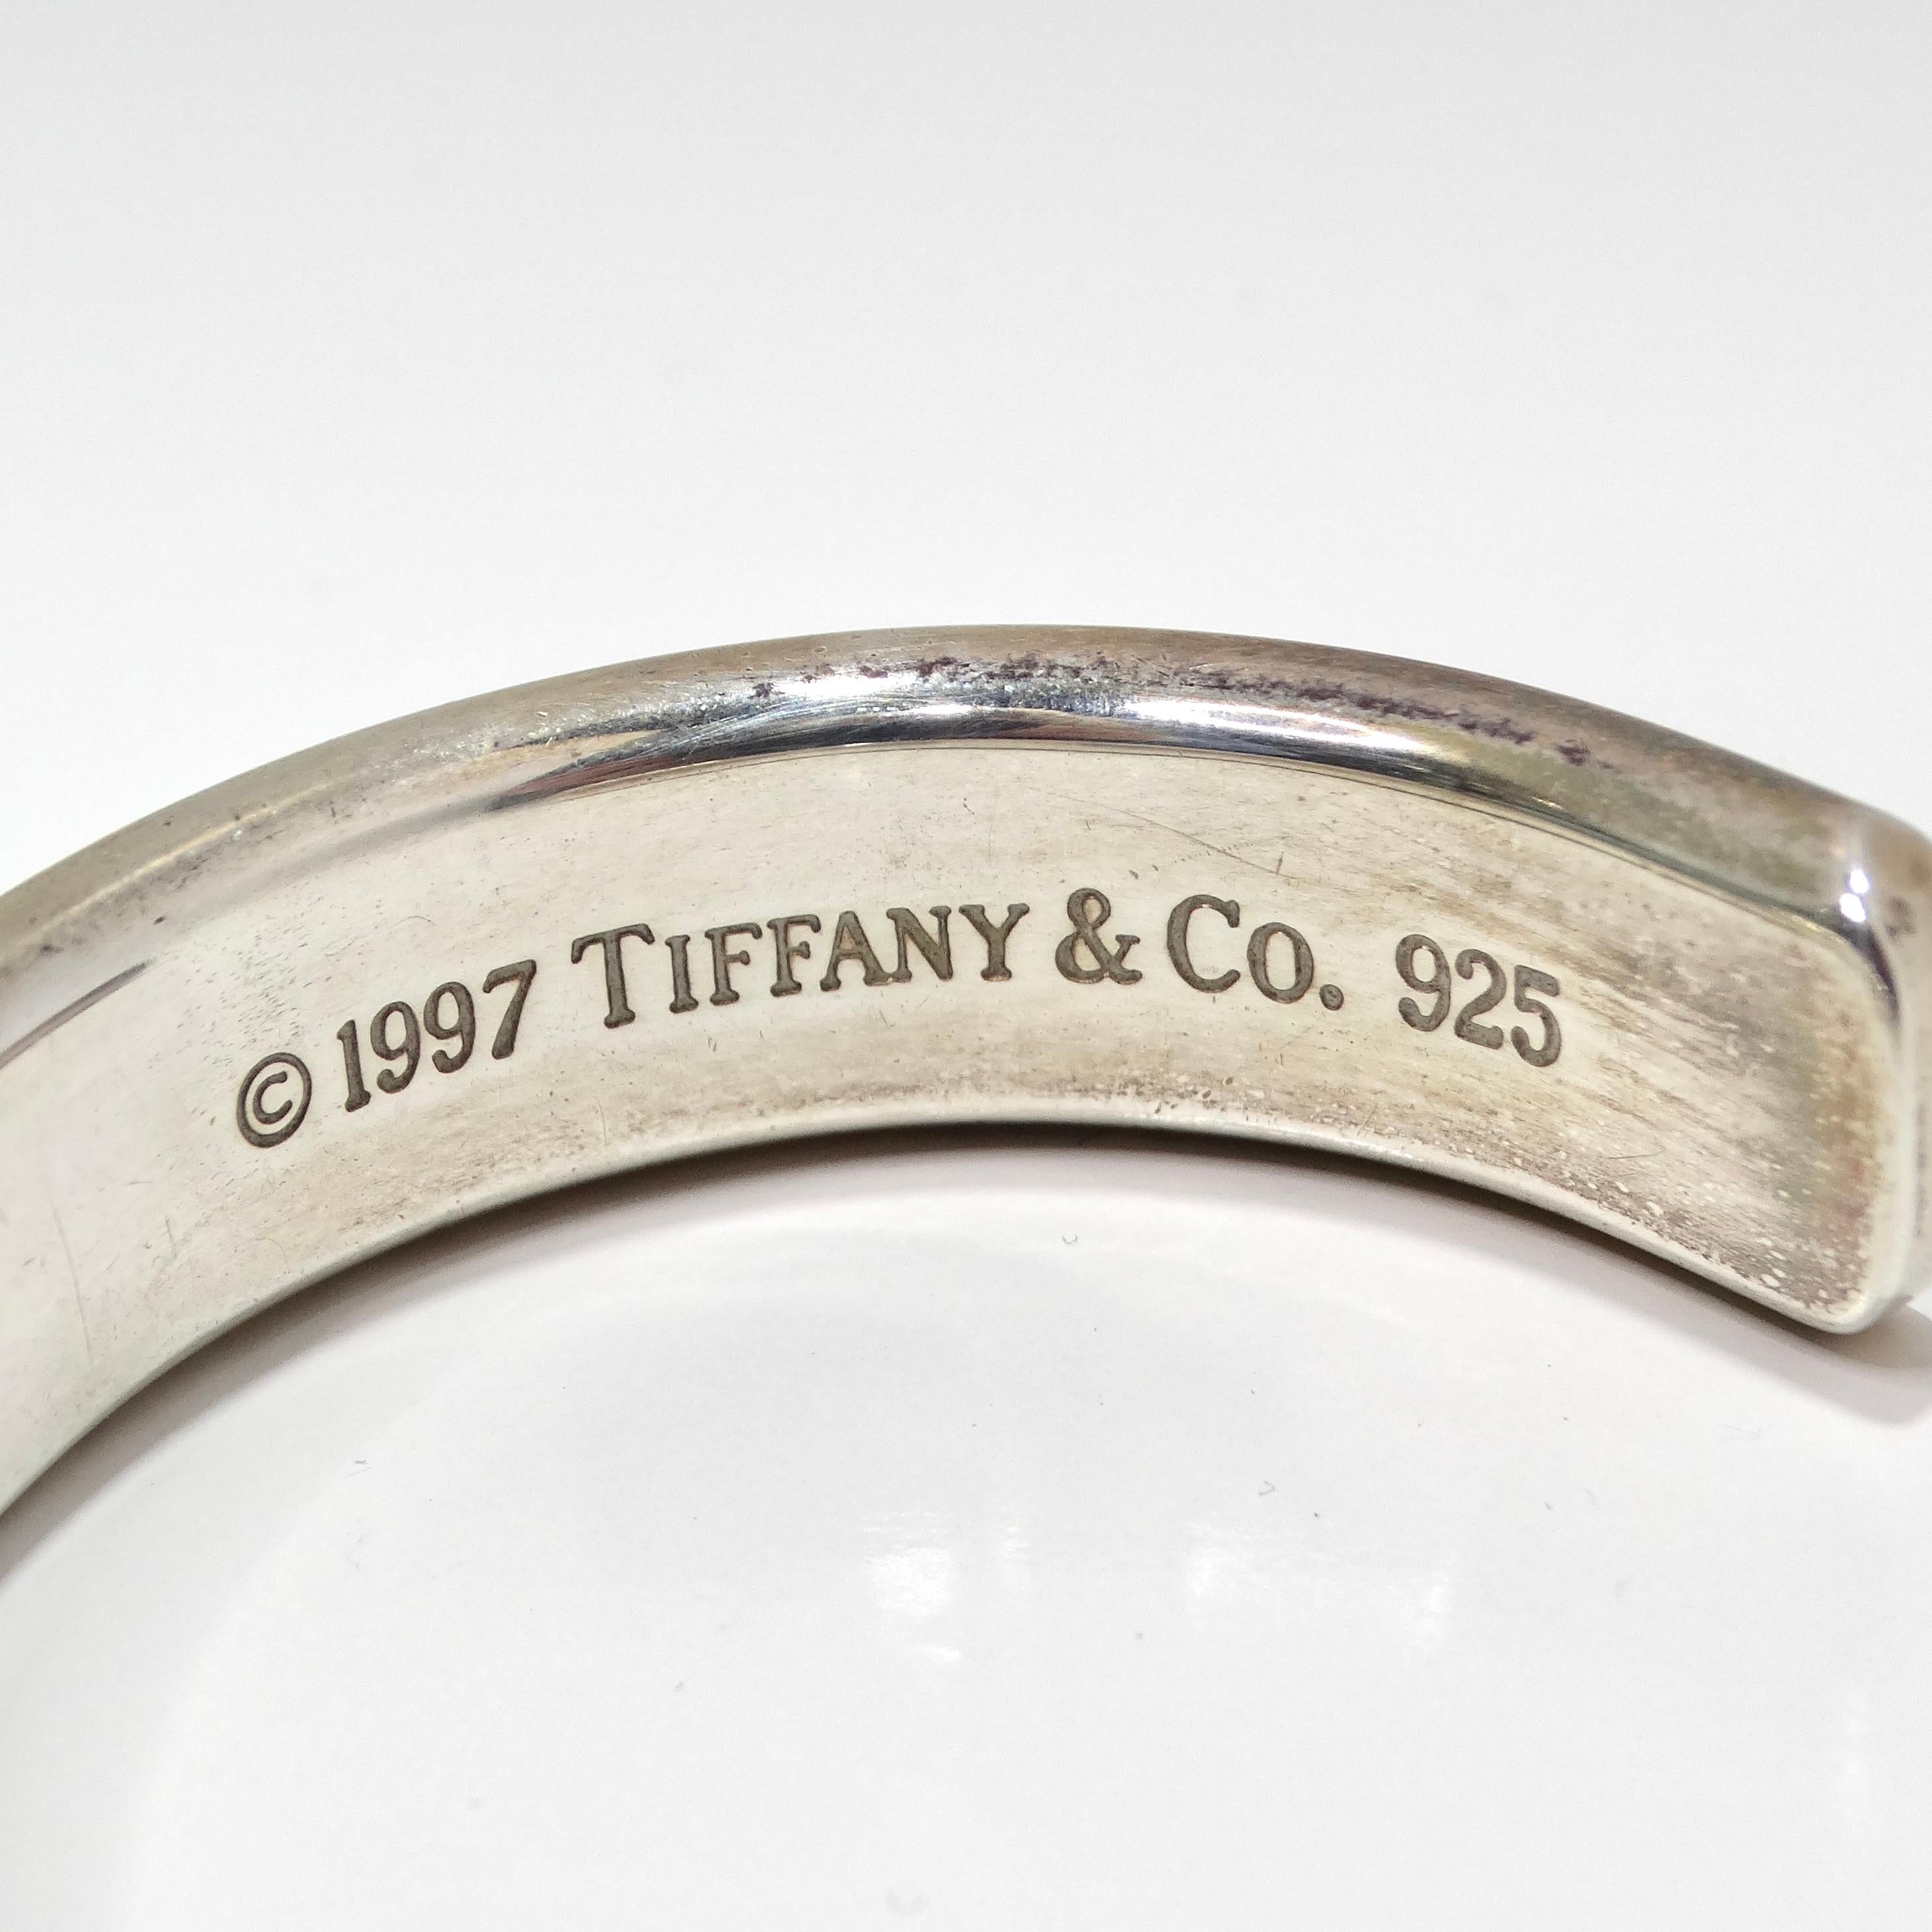 Tiffany & Co 1997 Silver 1925 Engraved Cuff Bracelet For Sale 4